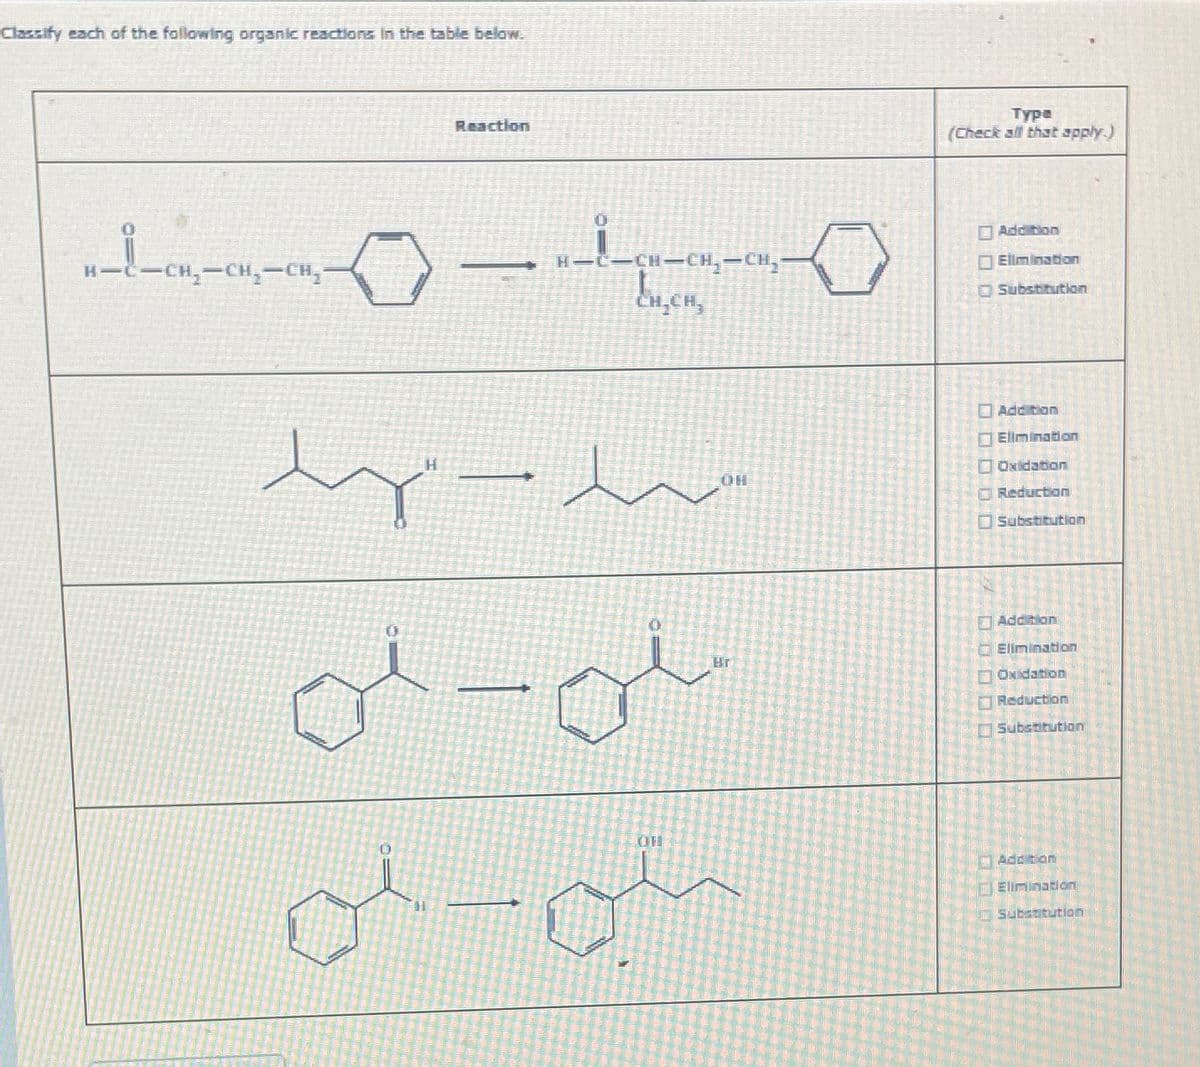 Classify each of the following organic reactions in the table below.
w-་-c“w,-་
H-
-CH2-CH₂-CH₂
Reaction
H
-
H
-CH-CH-CH₂
CH.CH,
HO
OH
Туре
(Check all that apply.)
O
Addition
Elimination
Substitution
Addition
Elimination
Oxidation
Reduction
Substitution
Br
Addition
Elimination
Oxidation
Reduction
Substitution
Addition
Elimination
Substitution